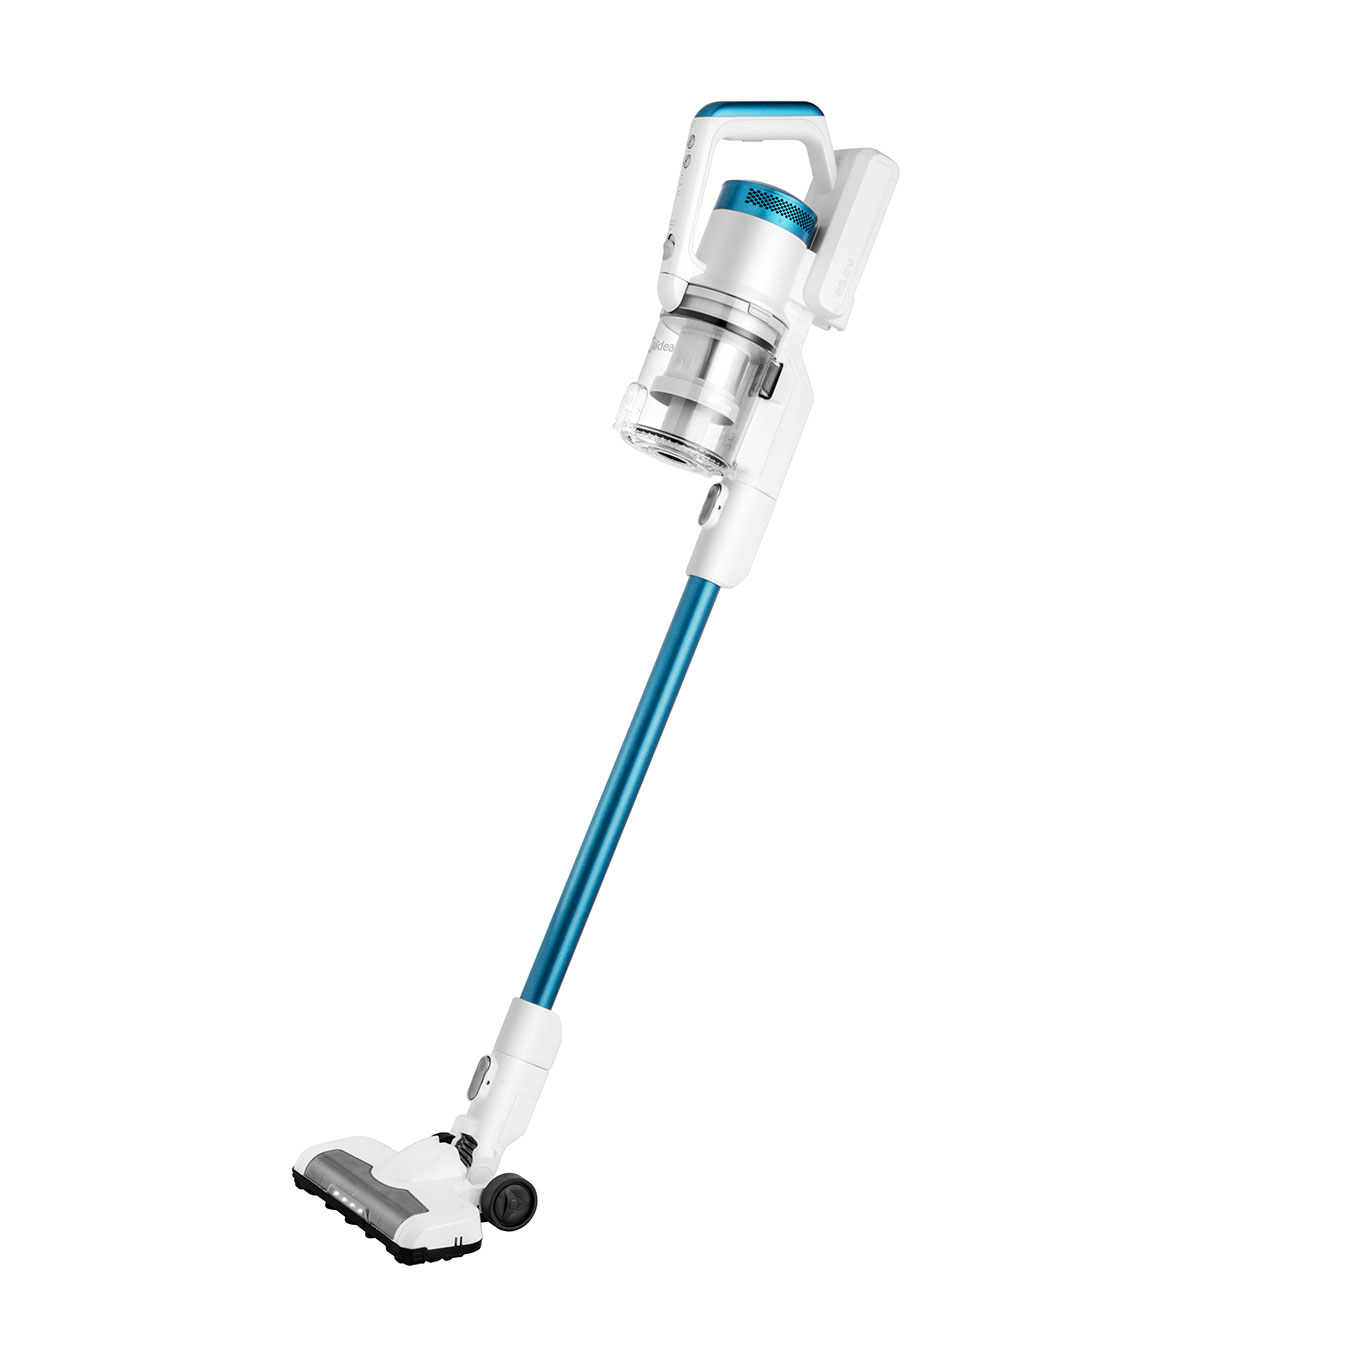 View Cordless 2 In 1 Stick Handheld Vacuum Cleaner By Midea Air Filtration System Includes Wall Mounted Dock 45 Mins Run Time High Street TV information